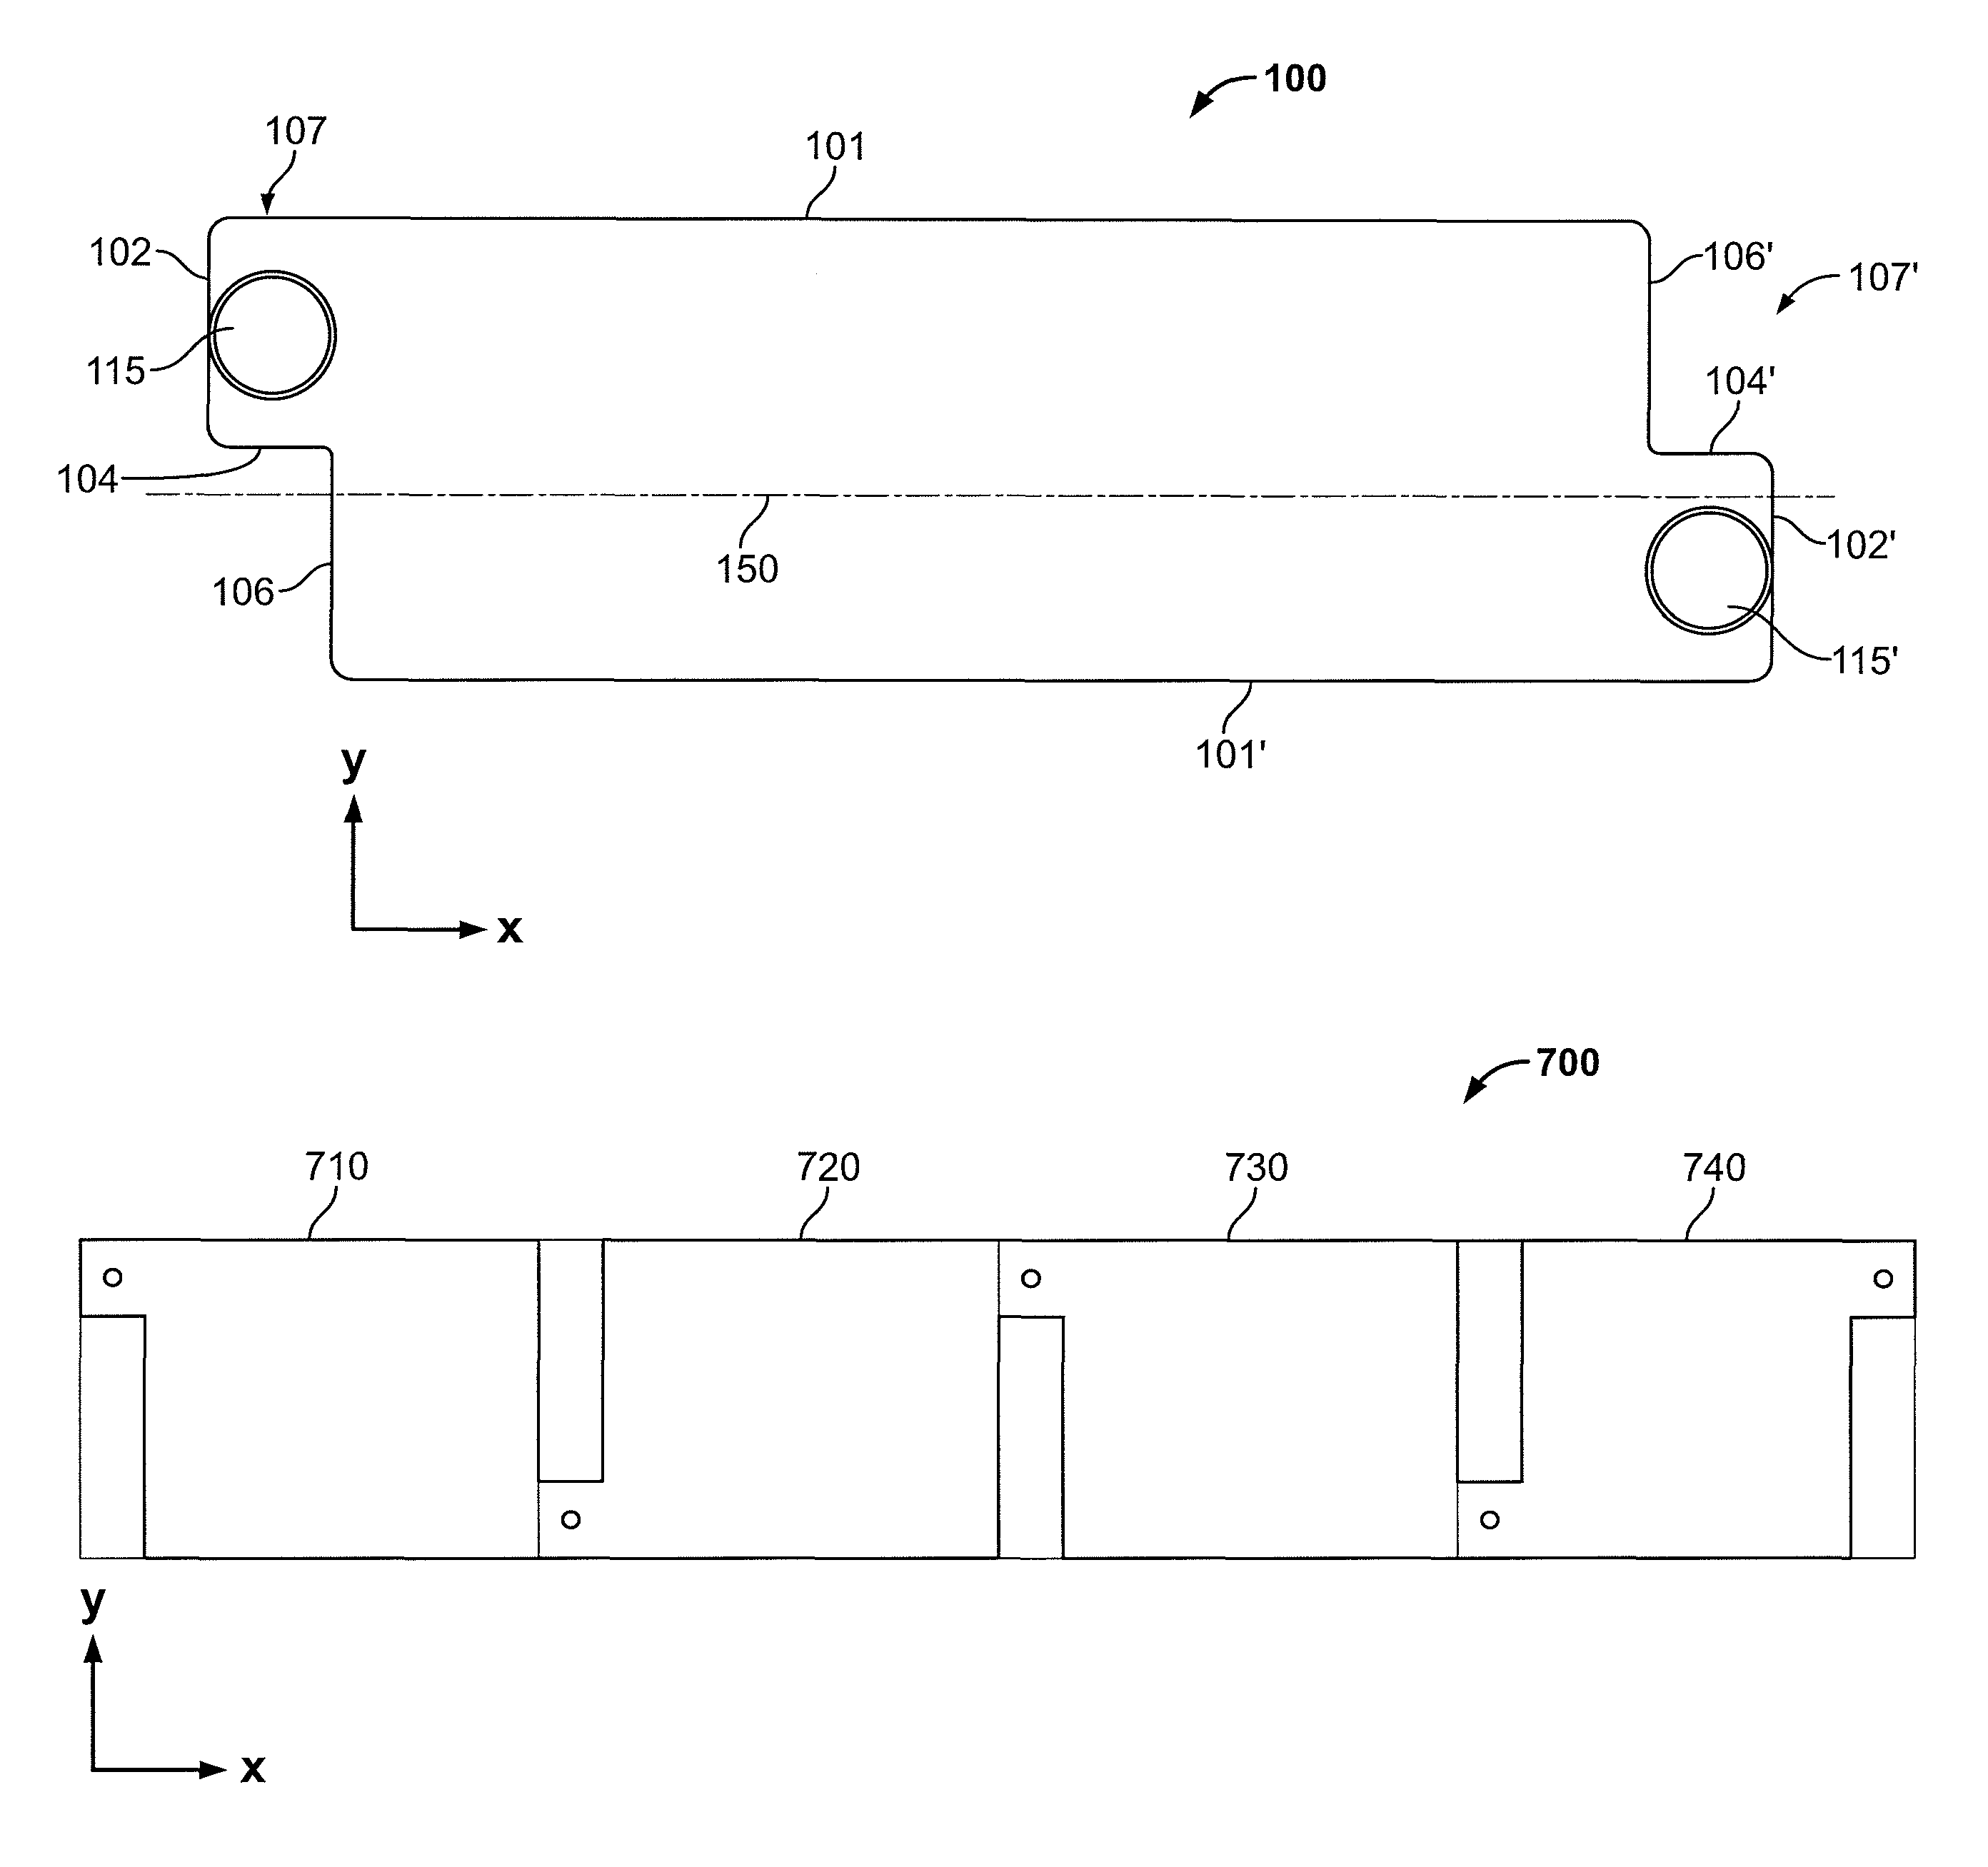 Mounting panel, system and method for high density fiber optic applications